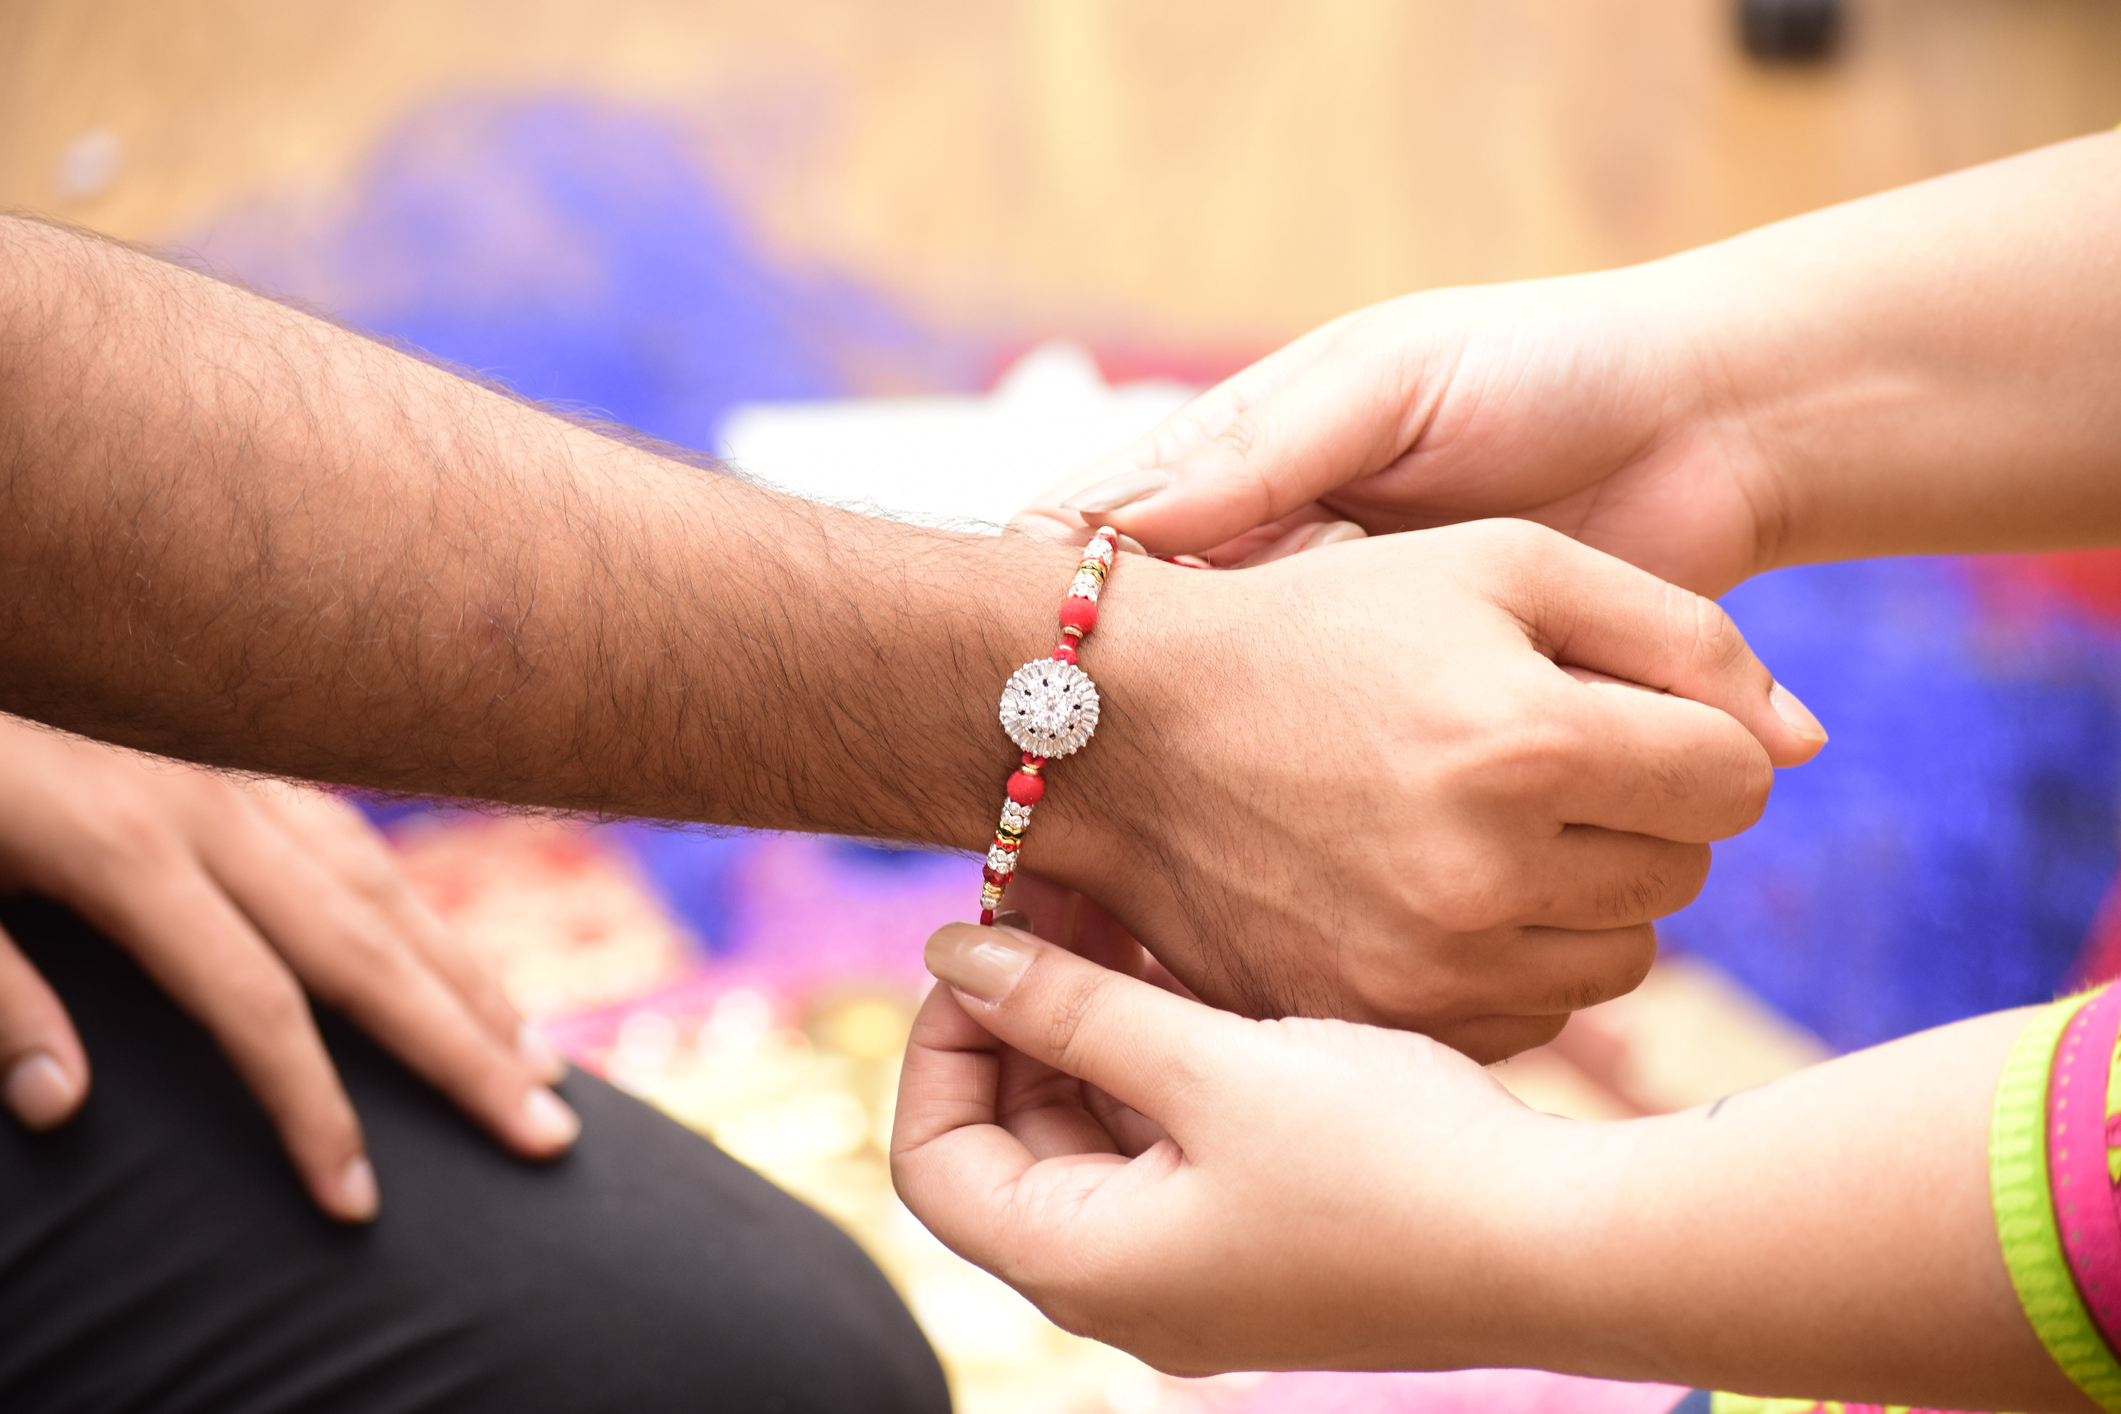 Sisters and Brothers, Friends, and Family Exchange Raksha Bandhana as a symbol of their love and commitment to each other.